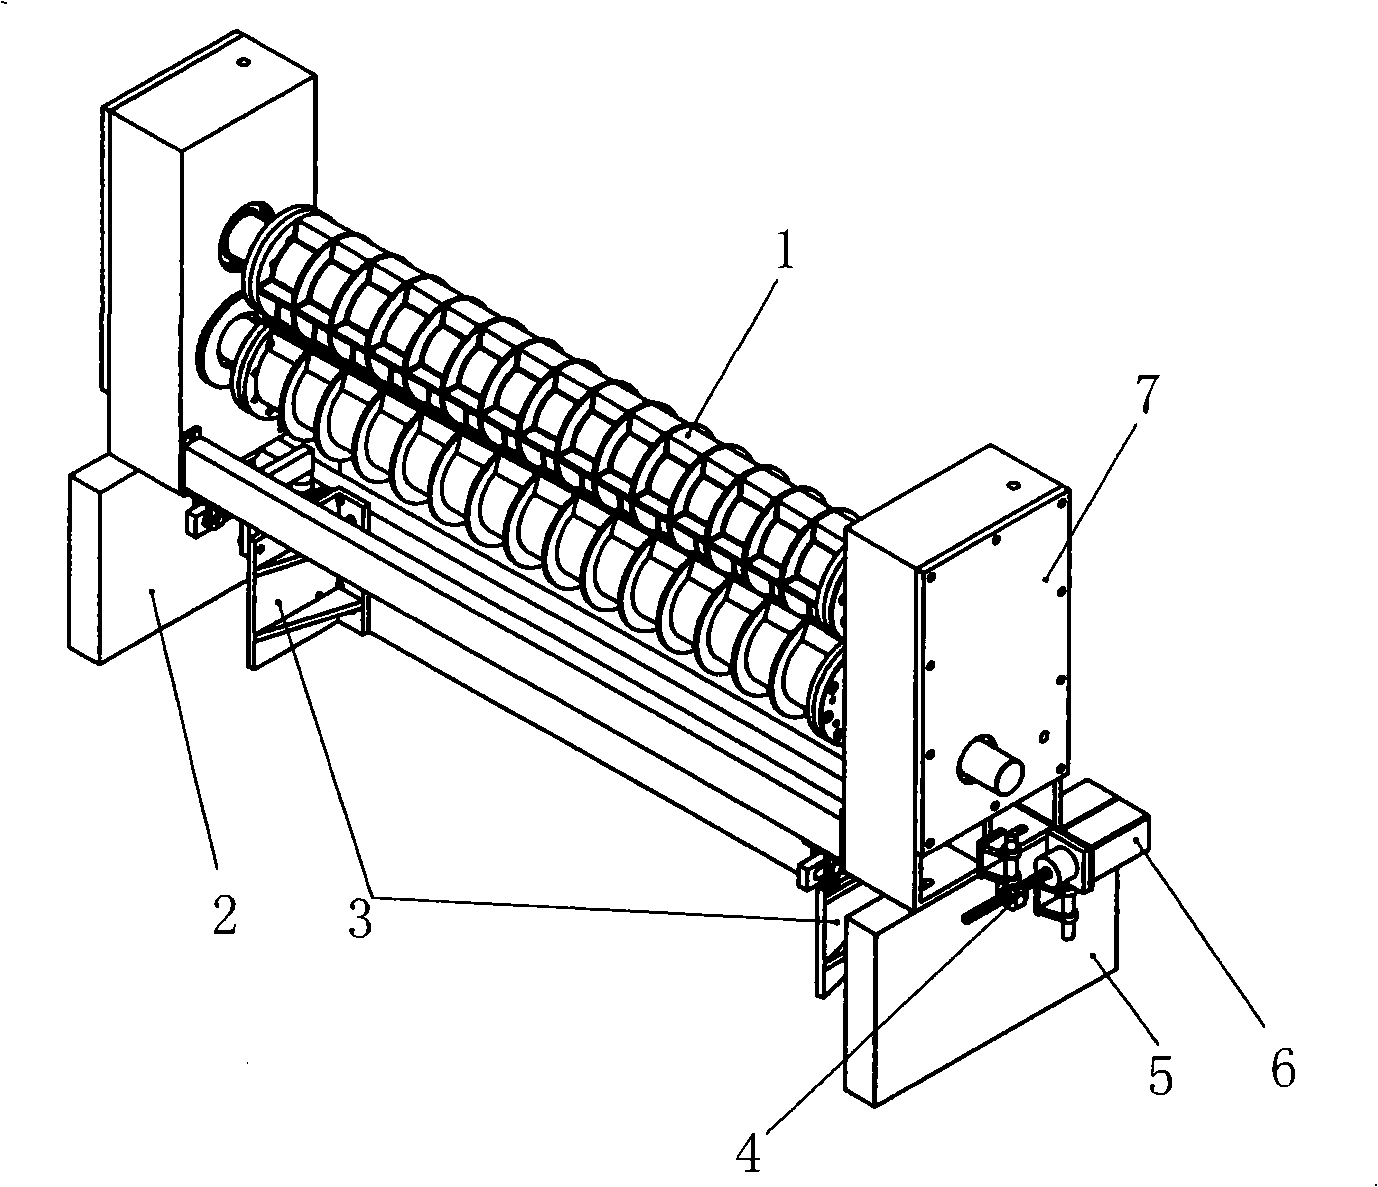 Transversely cutting device of paper cutter with double flying knives and method for adjusting length and squareness of cut paper